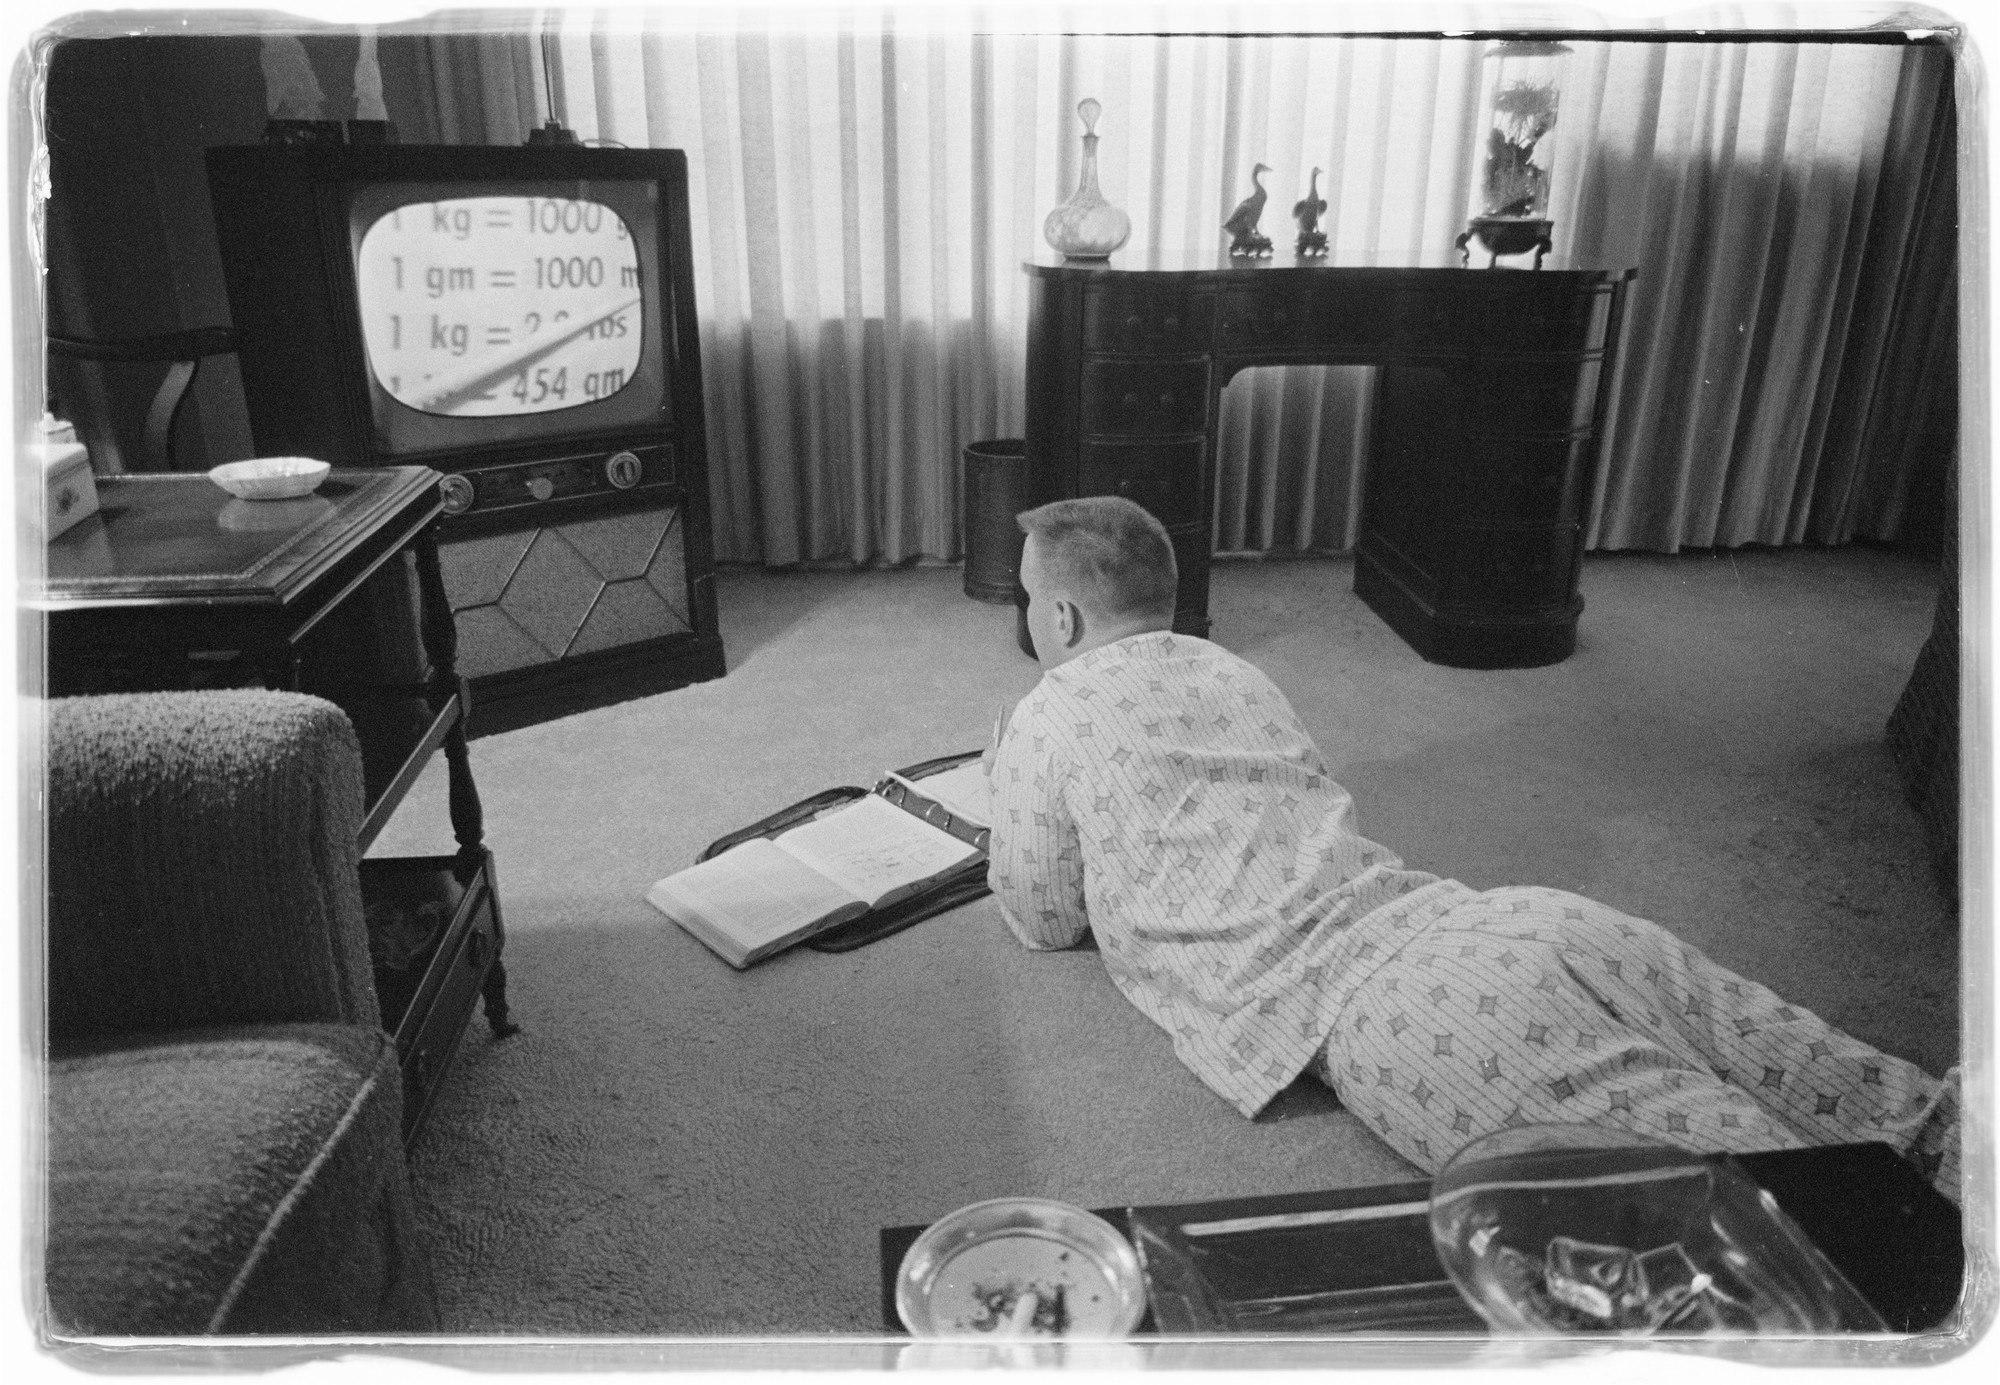 To avoid a court order of integration in schools in Little Rock, Arkansas, students took classes from TV sets while schools were closed in 1958.